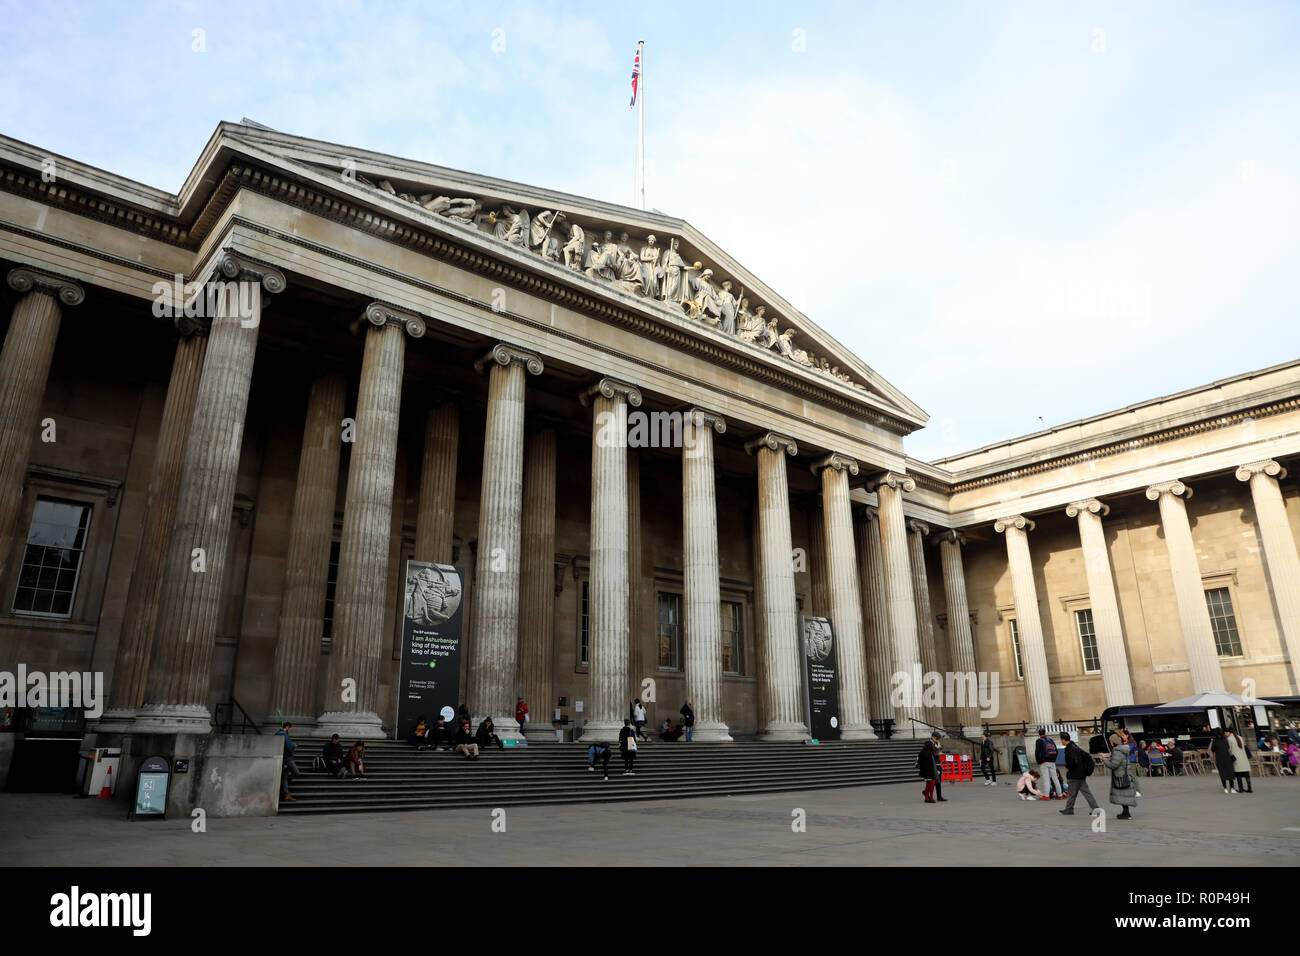 London, UK – October 5 2018: The main entrance to the British Museum Stock Photo